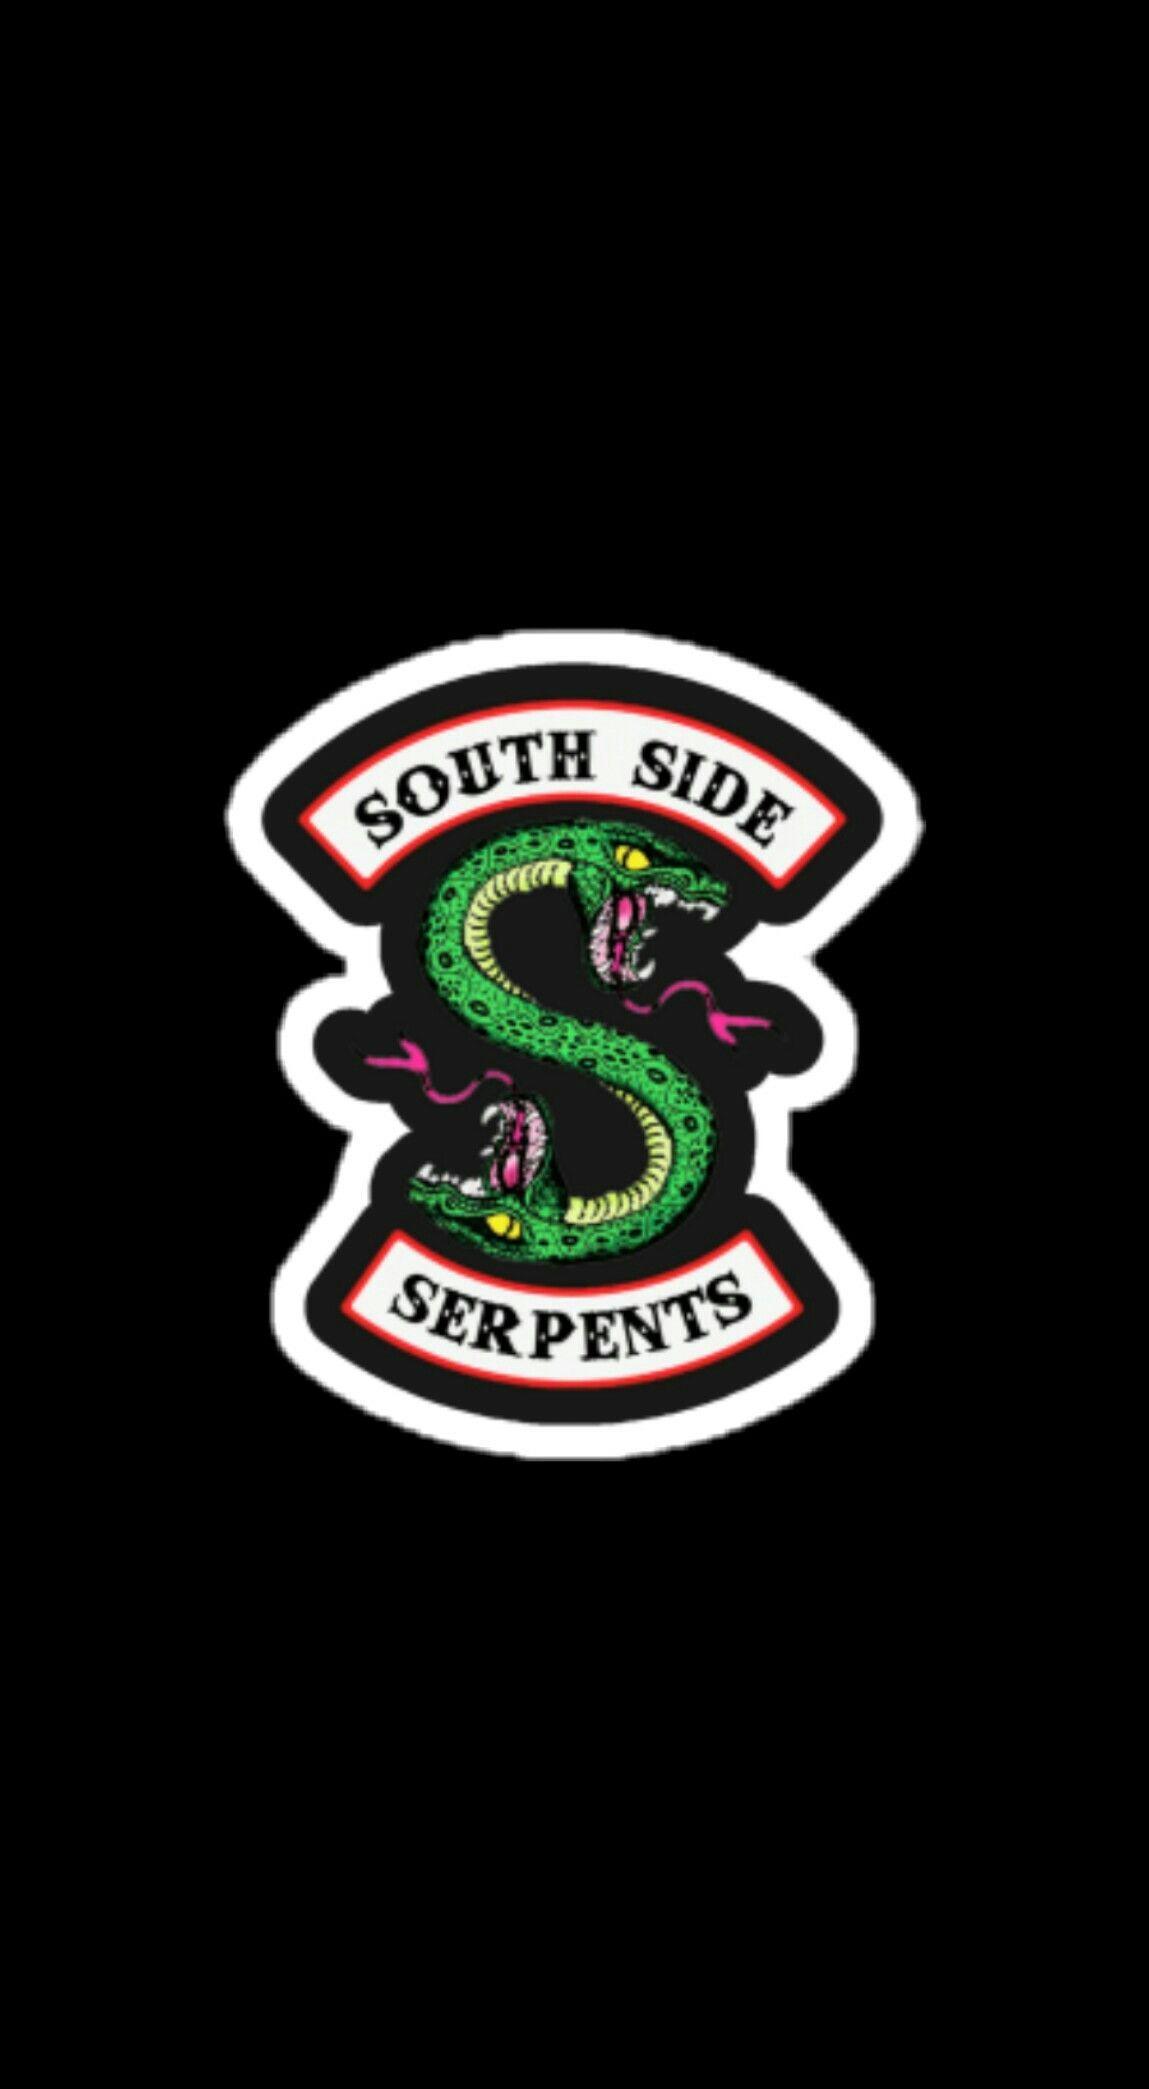 South side serpents wallpaper by Yeahsh  Download on ZEDGE  2a61